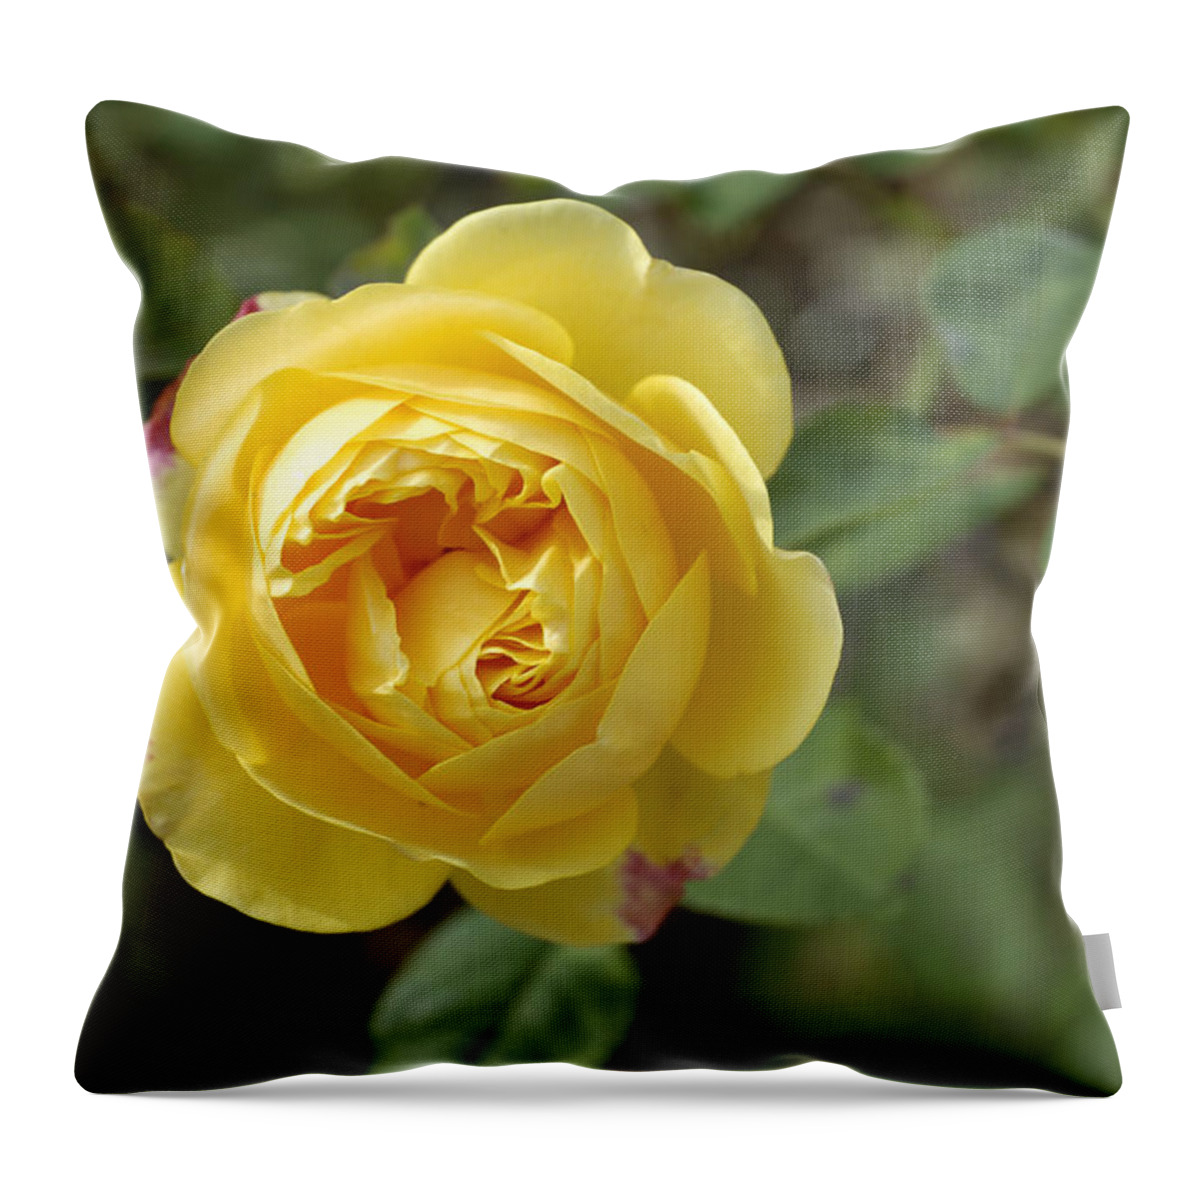 Rose Throw Pillow featuring the photograph Yellow rose by Matthias Hauser